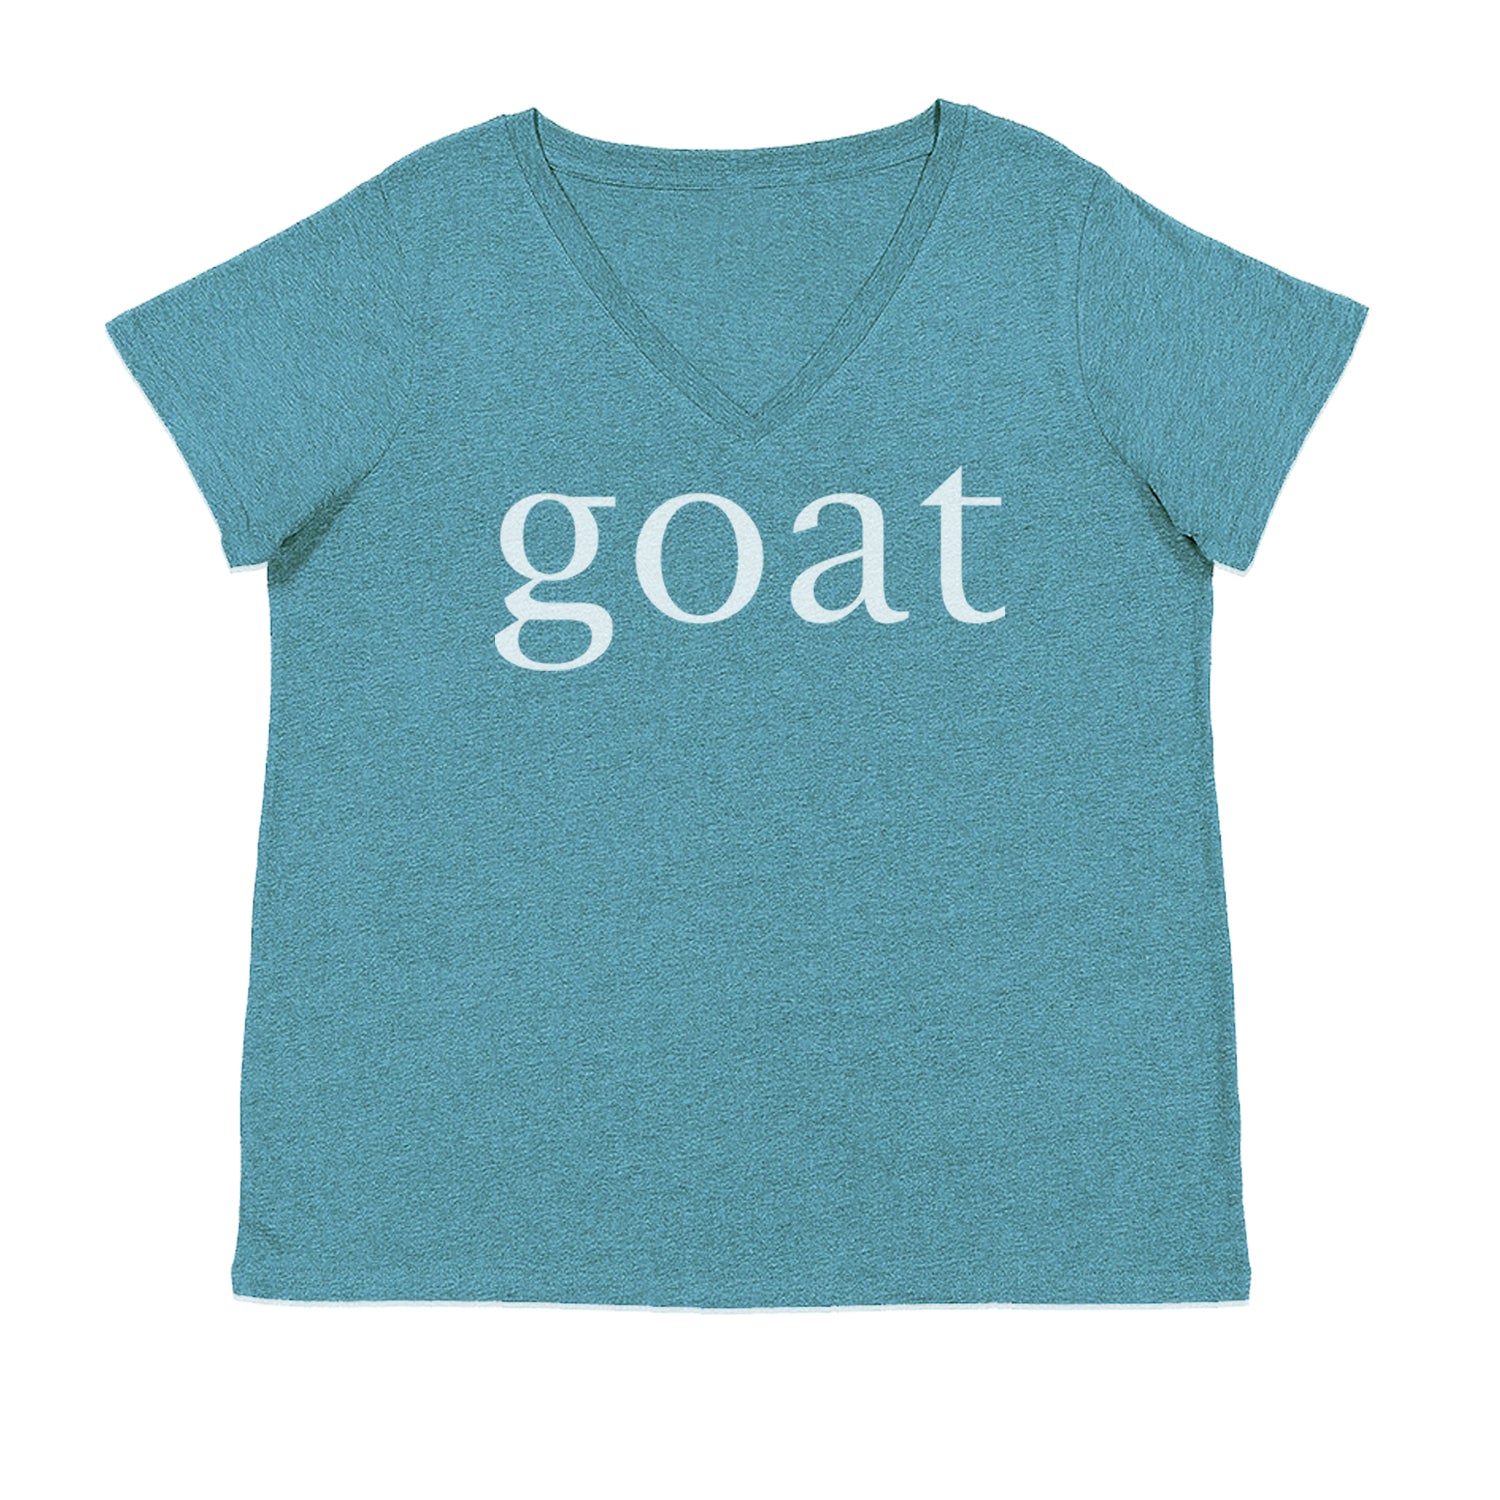 GOAT - Greatest Of All Time  Ladies V-Neck T-shirt Surf